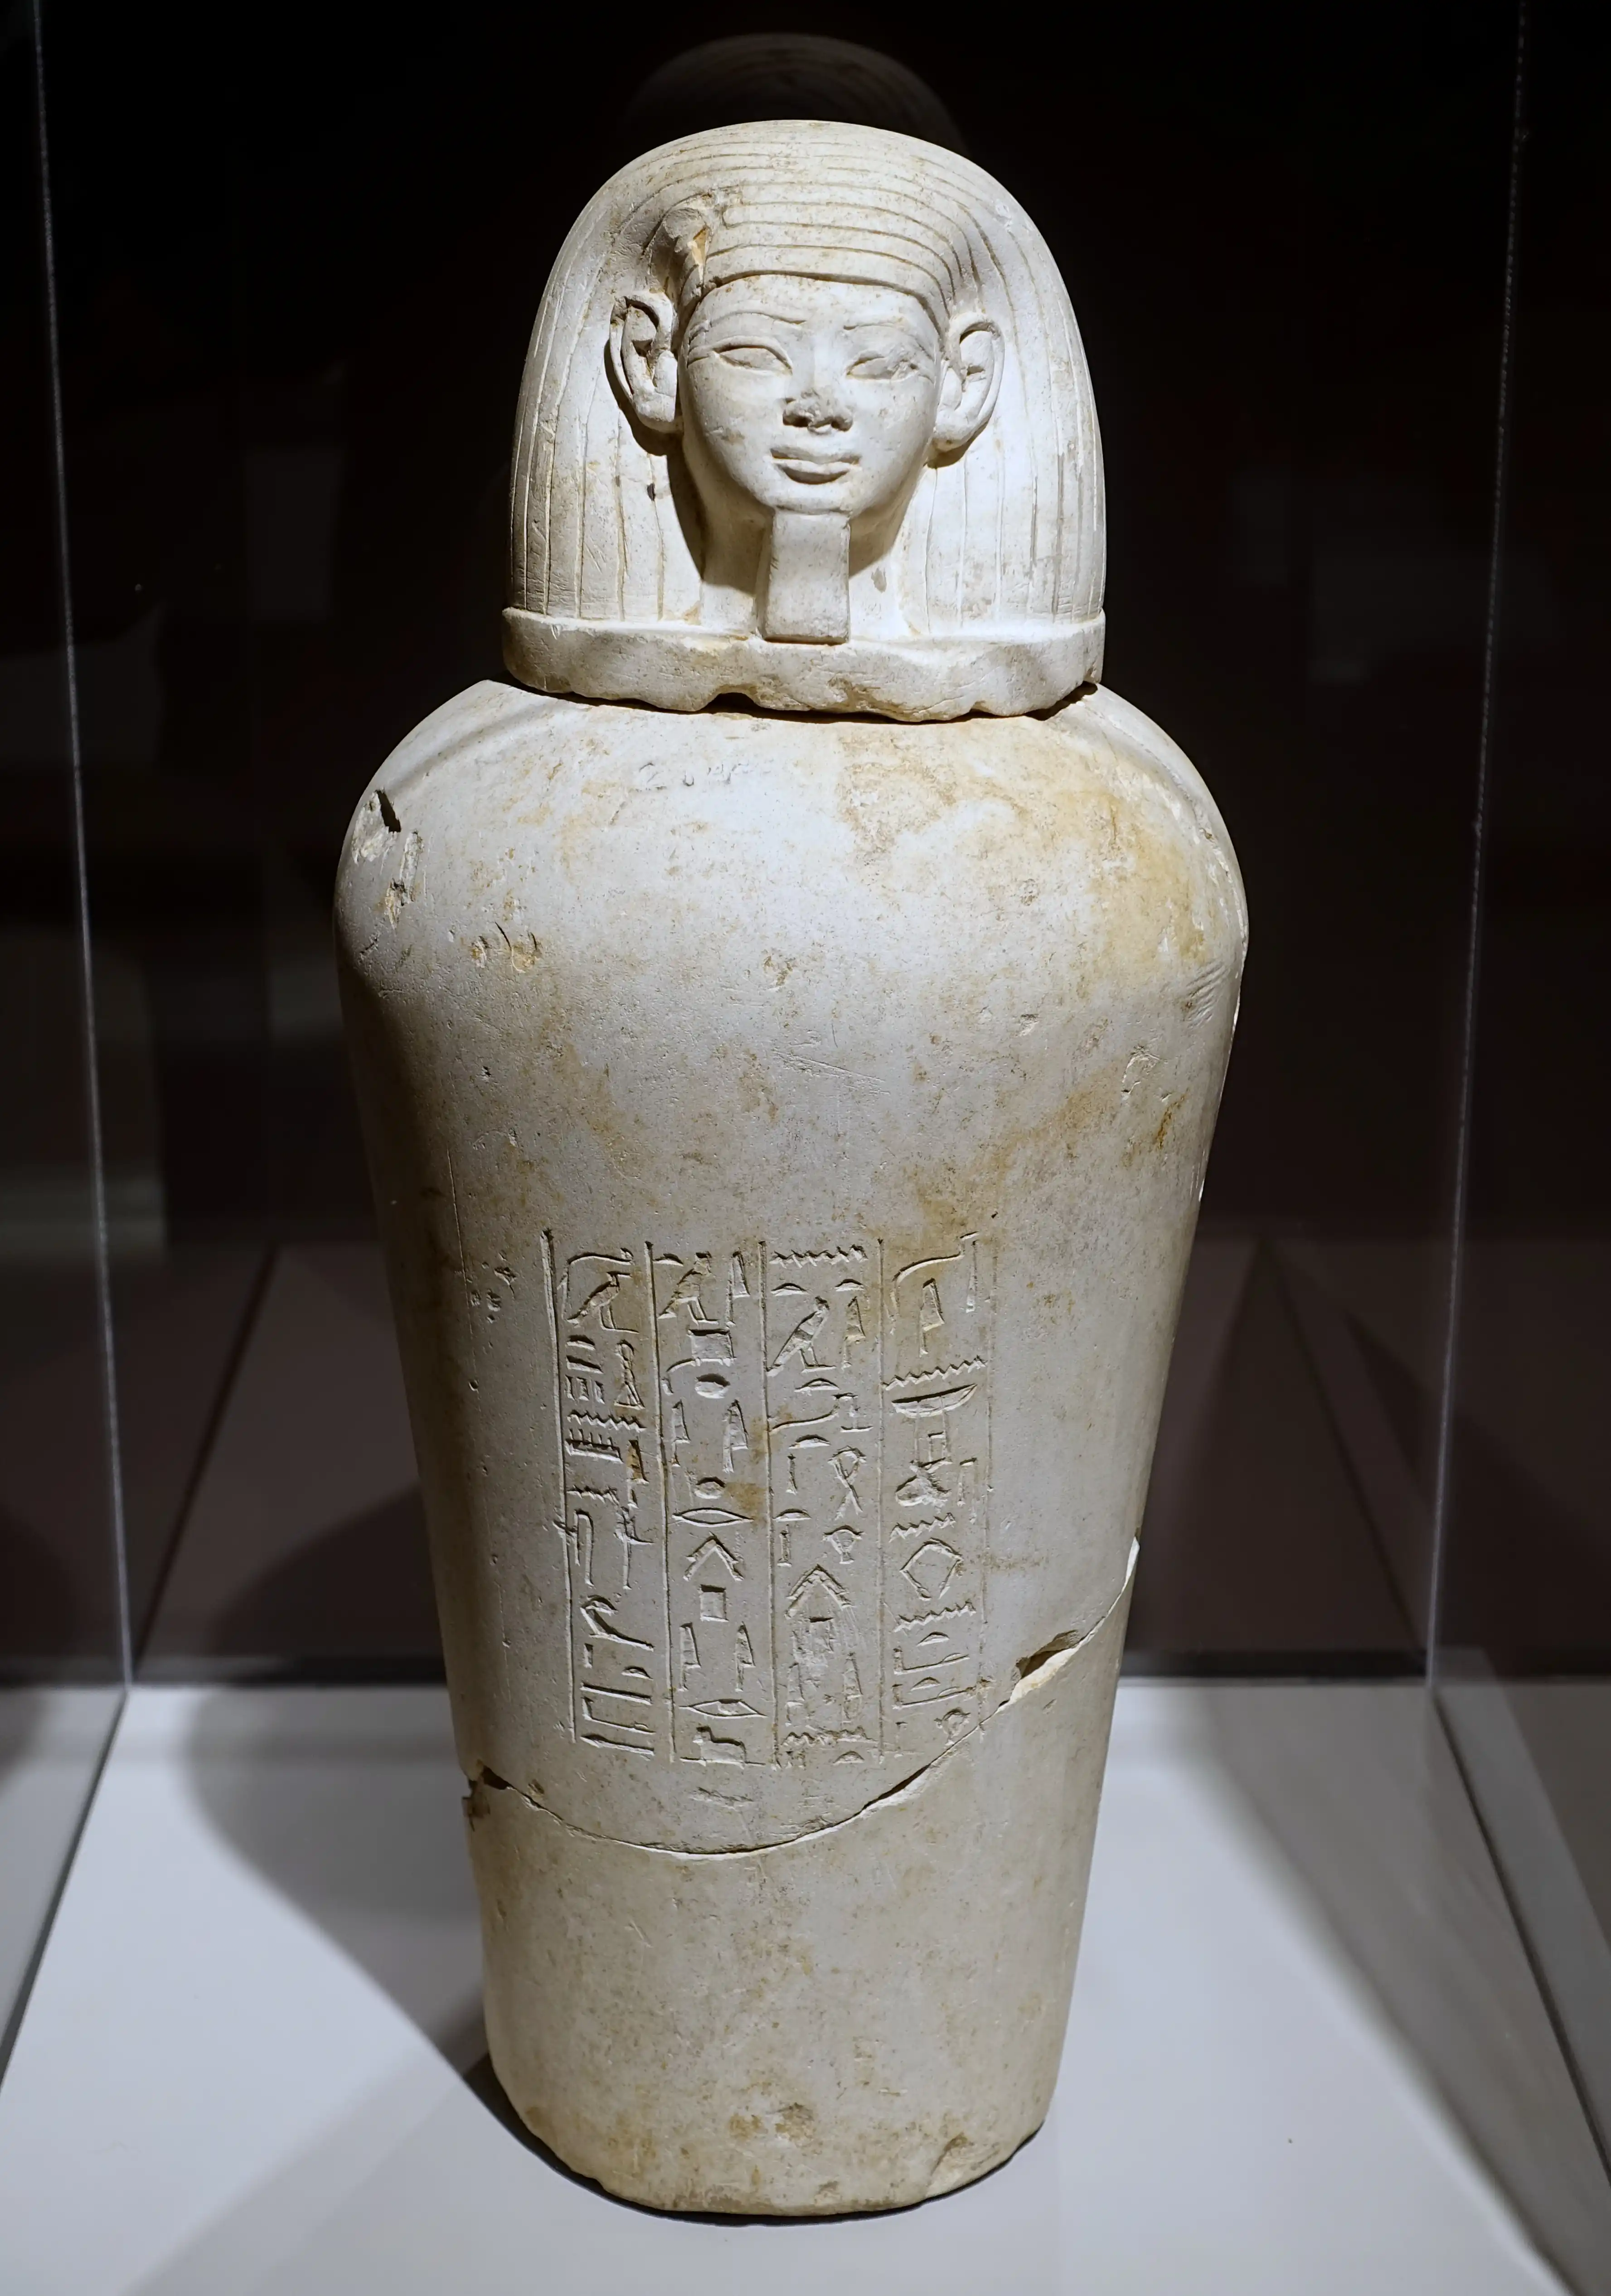 Canopic_jar_of_Userhat,_Egypt,_Valley_of_the_Kings,_tomb_KV_45,_Dynasty_18,_reigns_of_Thutmose_III_to_Amenhotep_III,_1400-1352_BC,_limestone_-_Harvard_Semitic_Museum_-_Cambridge,_MA_-_DSC06219